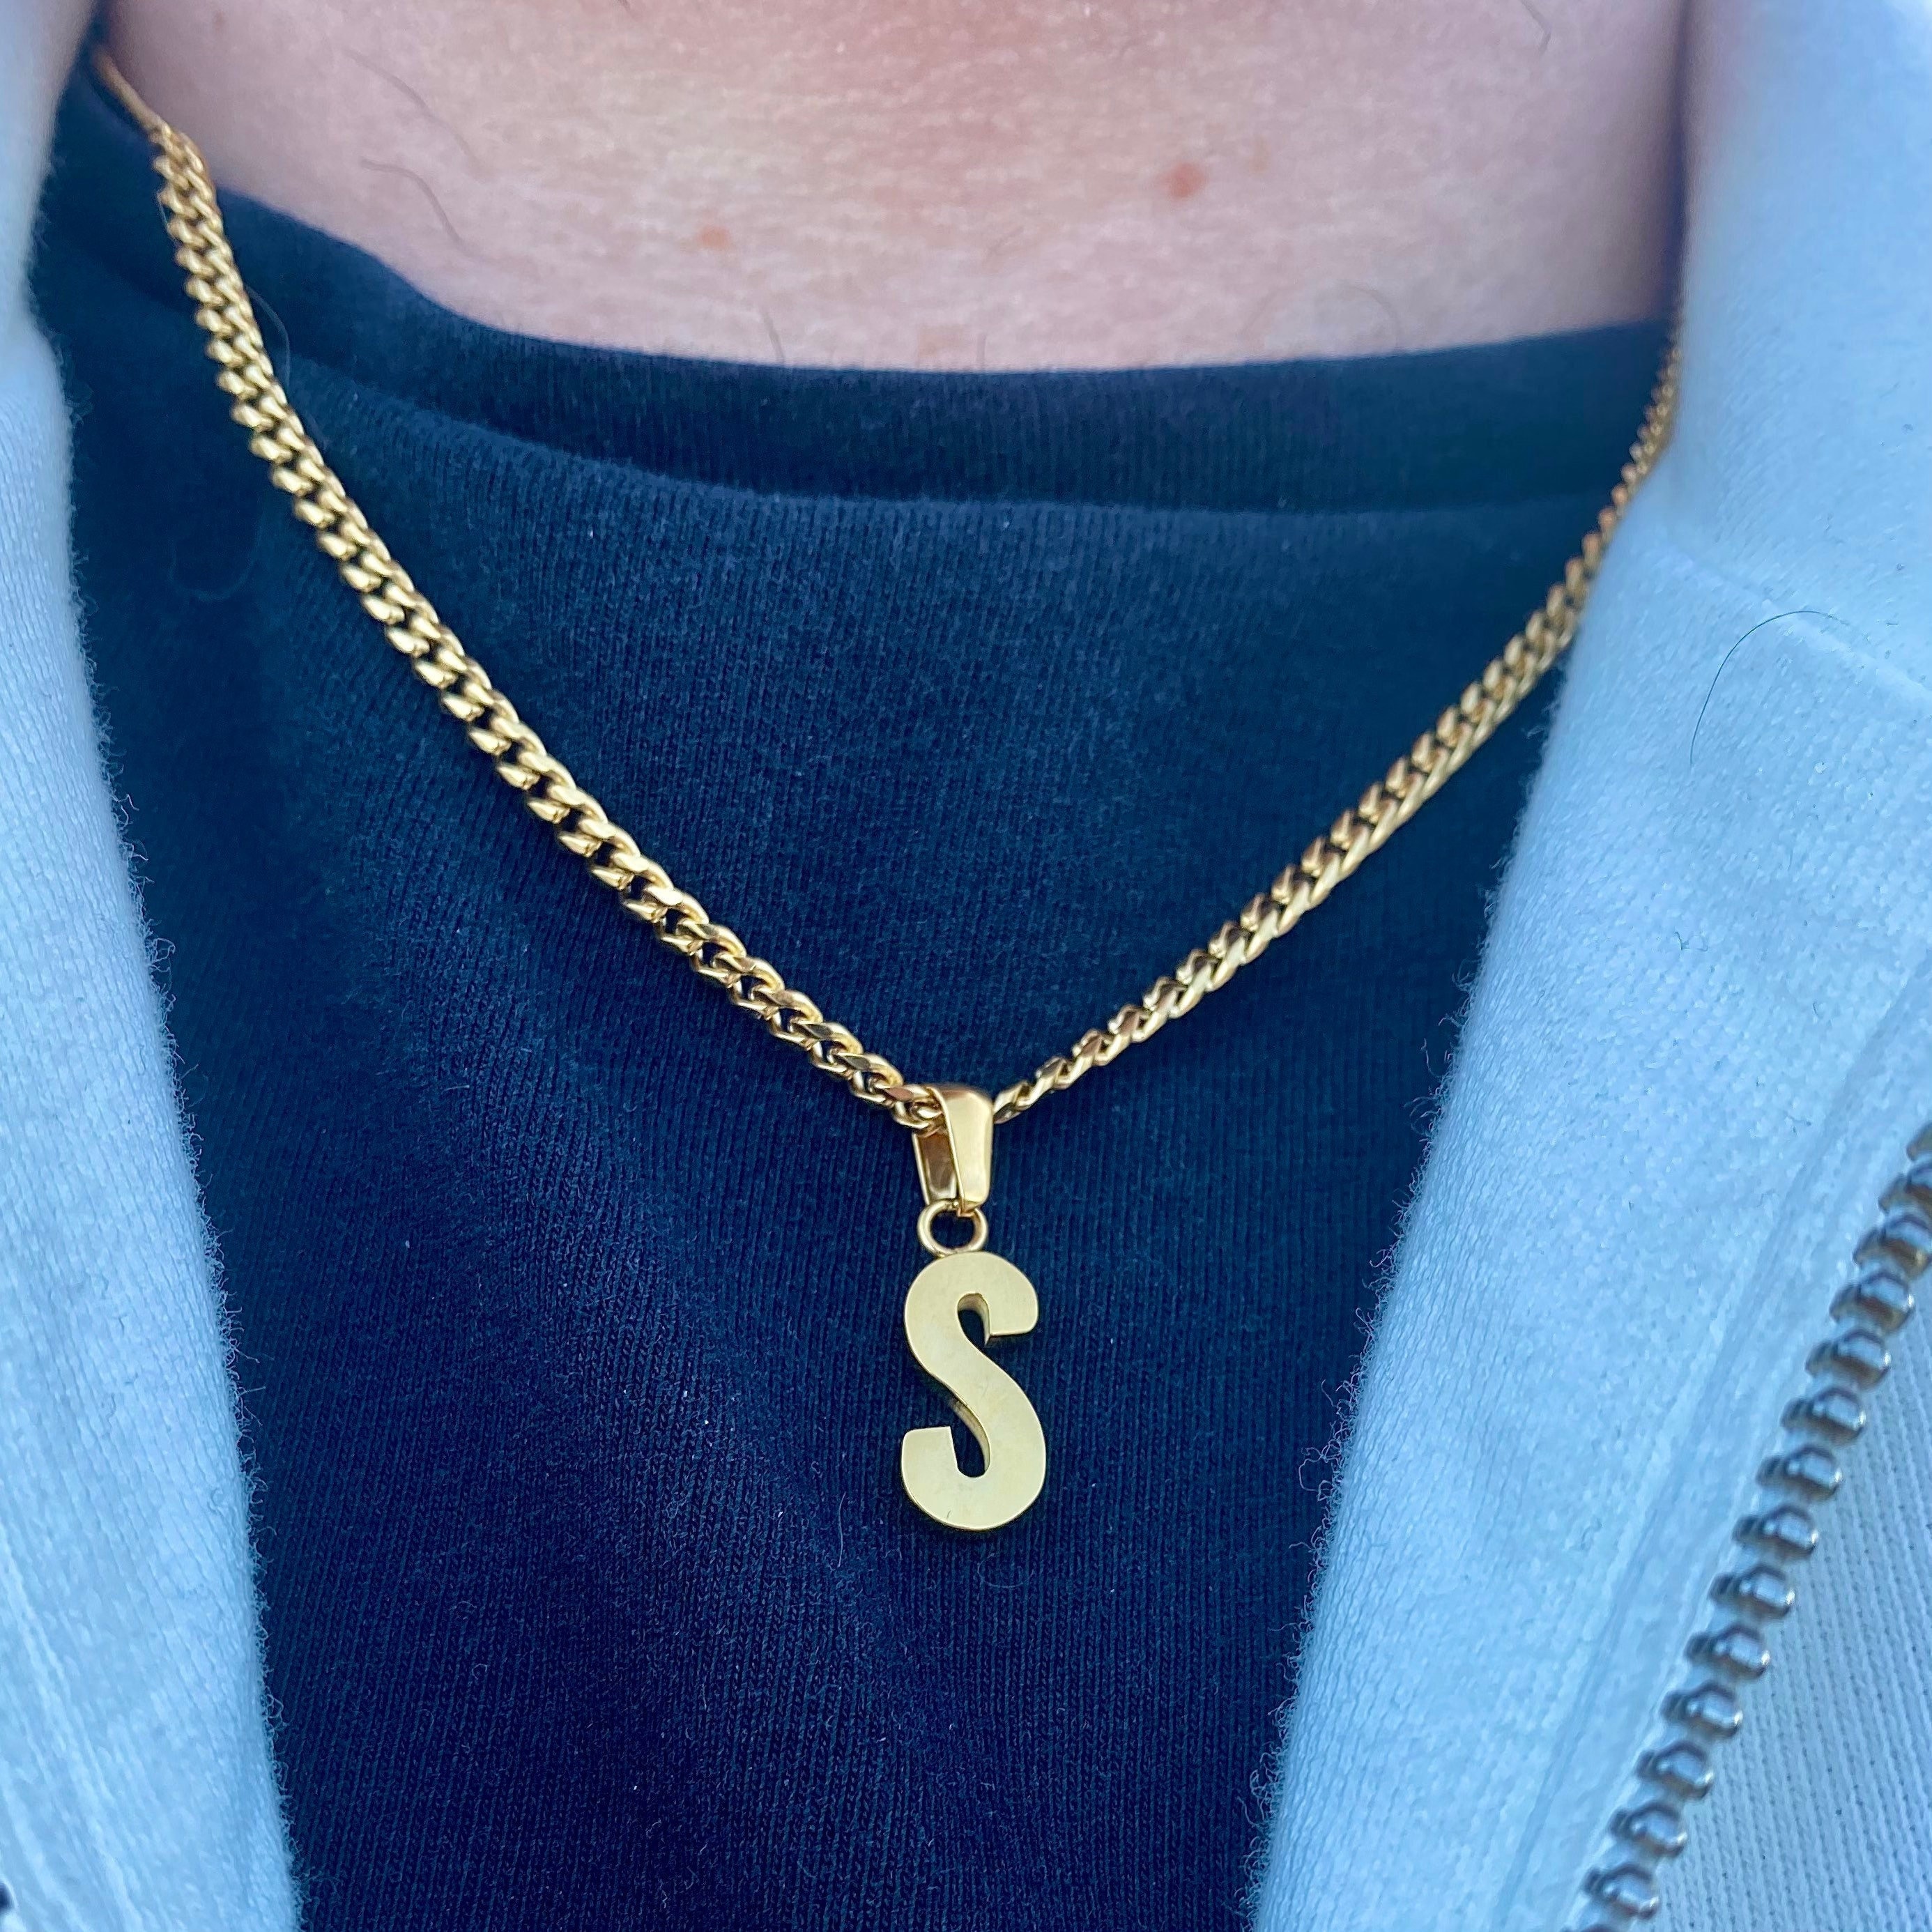 Men's Personalised Necklaces & Chains - MYKA